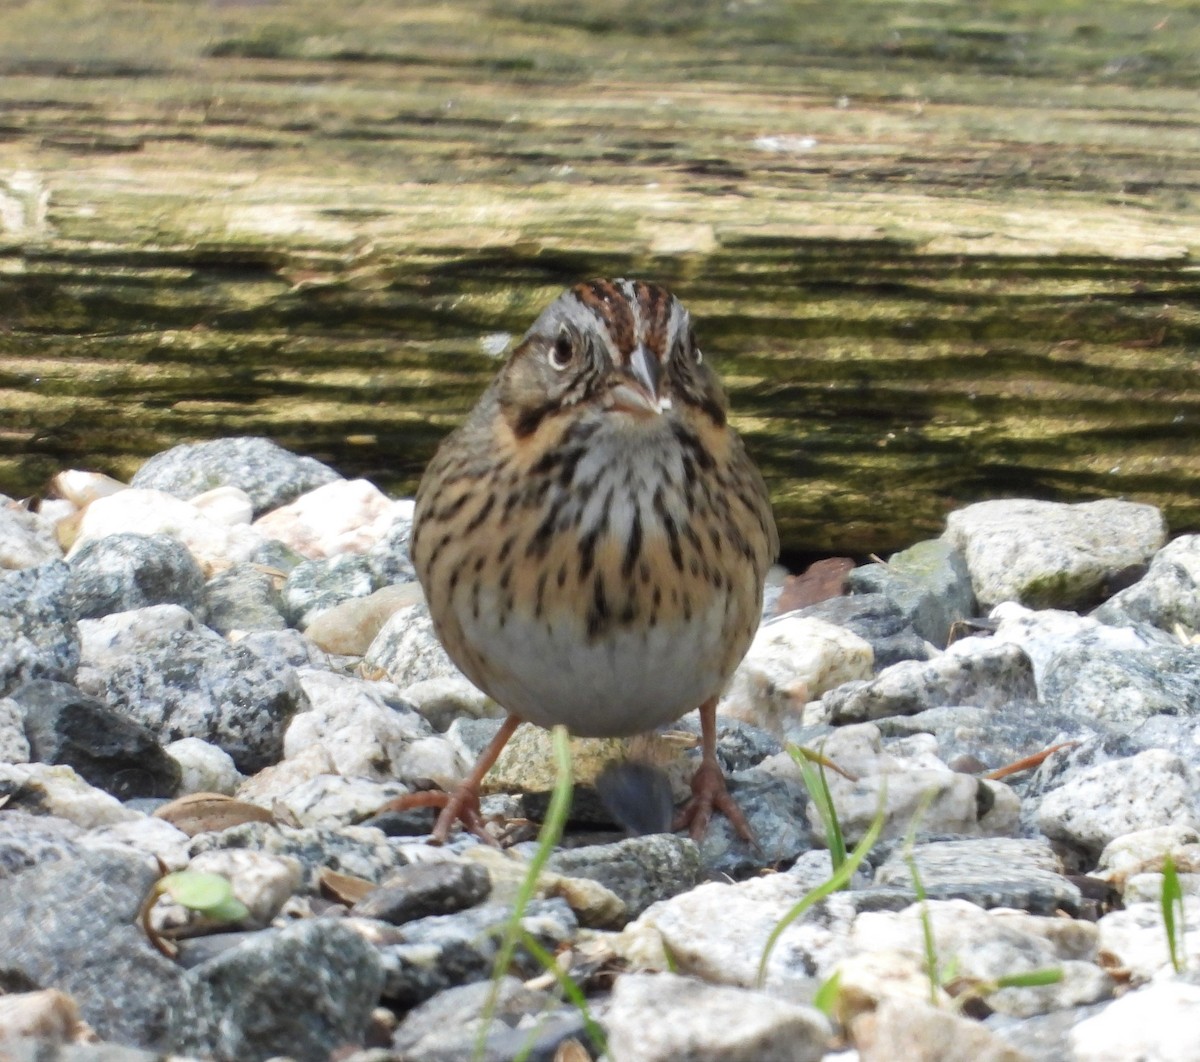 Lincoln's Sparrow - Dale Floer